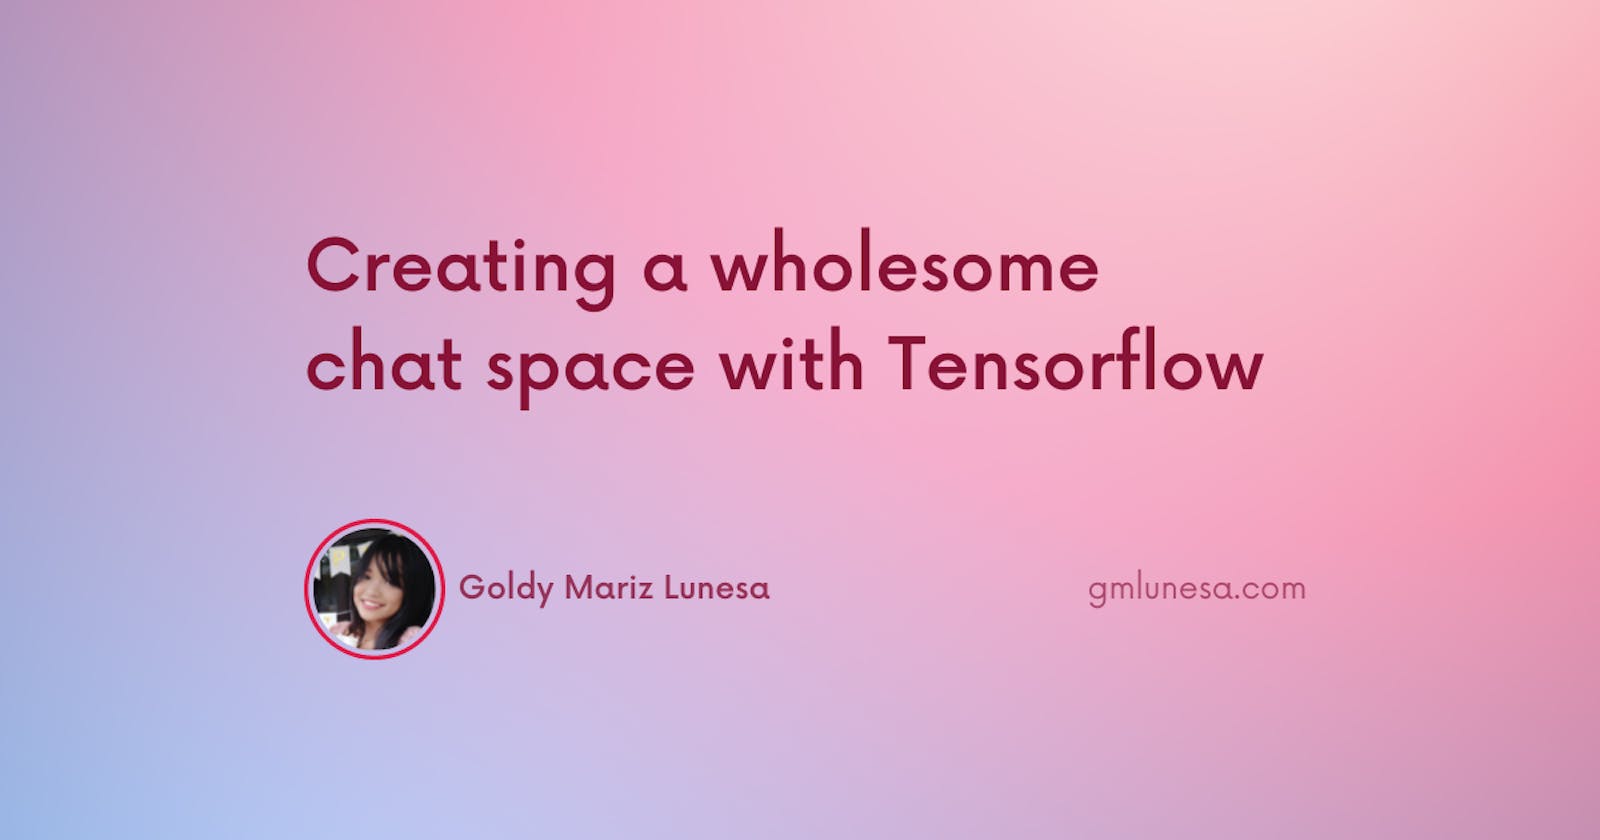 Creating a wholesome chat space with Tensorflow